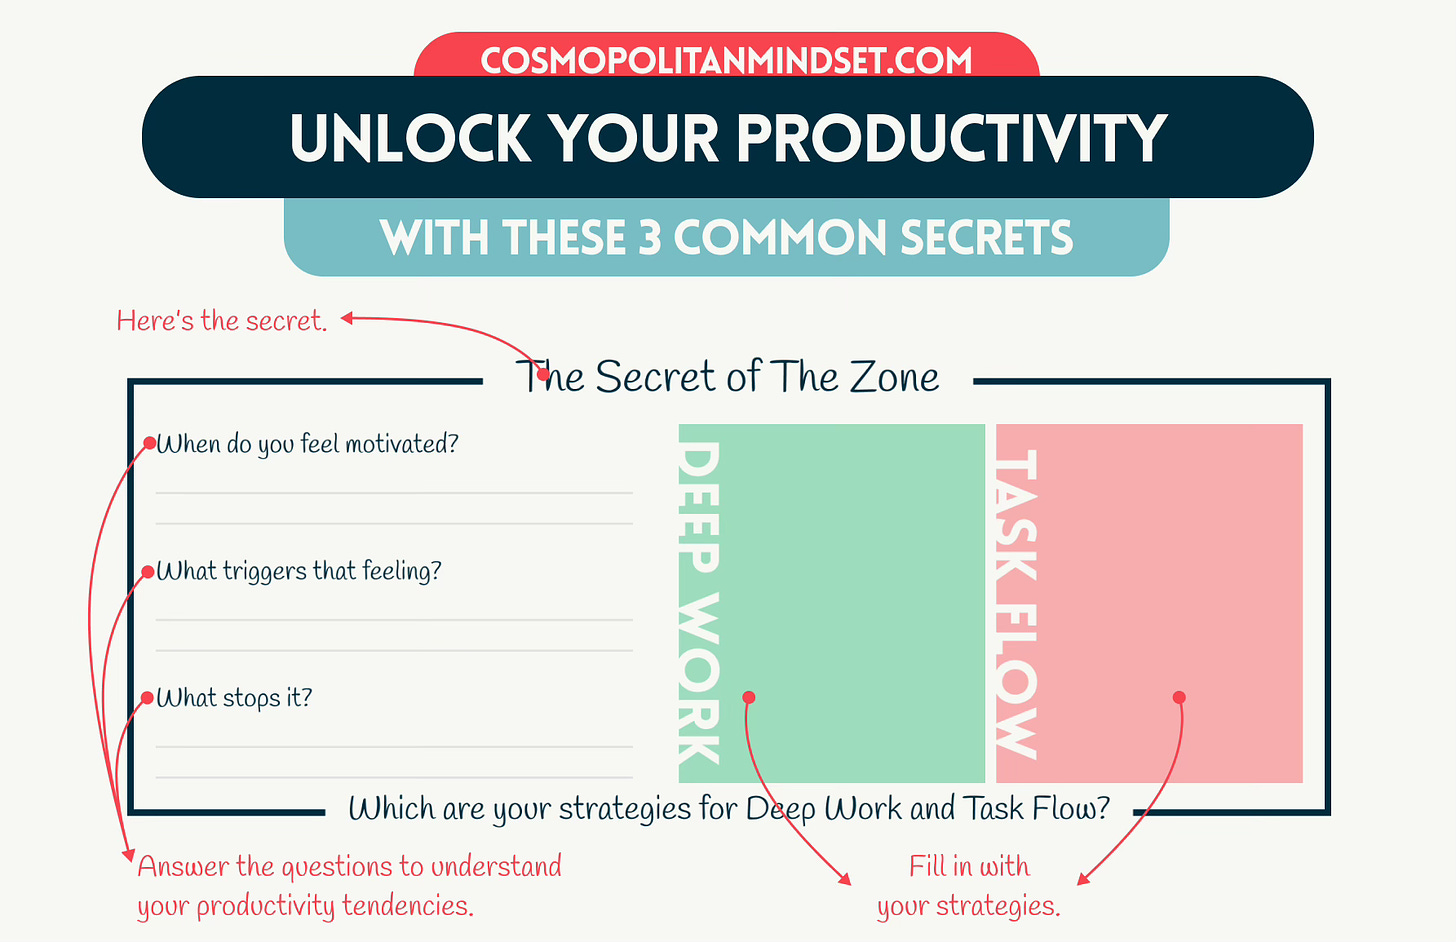 Instructions for Unlock Your Productivity with These 3 Common Secrets